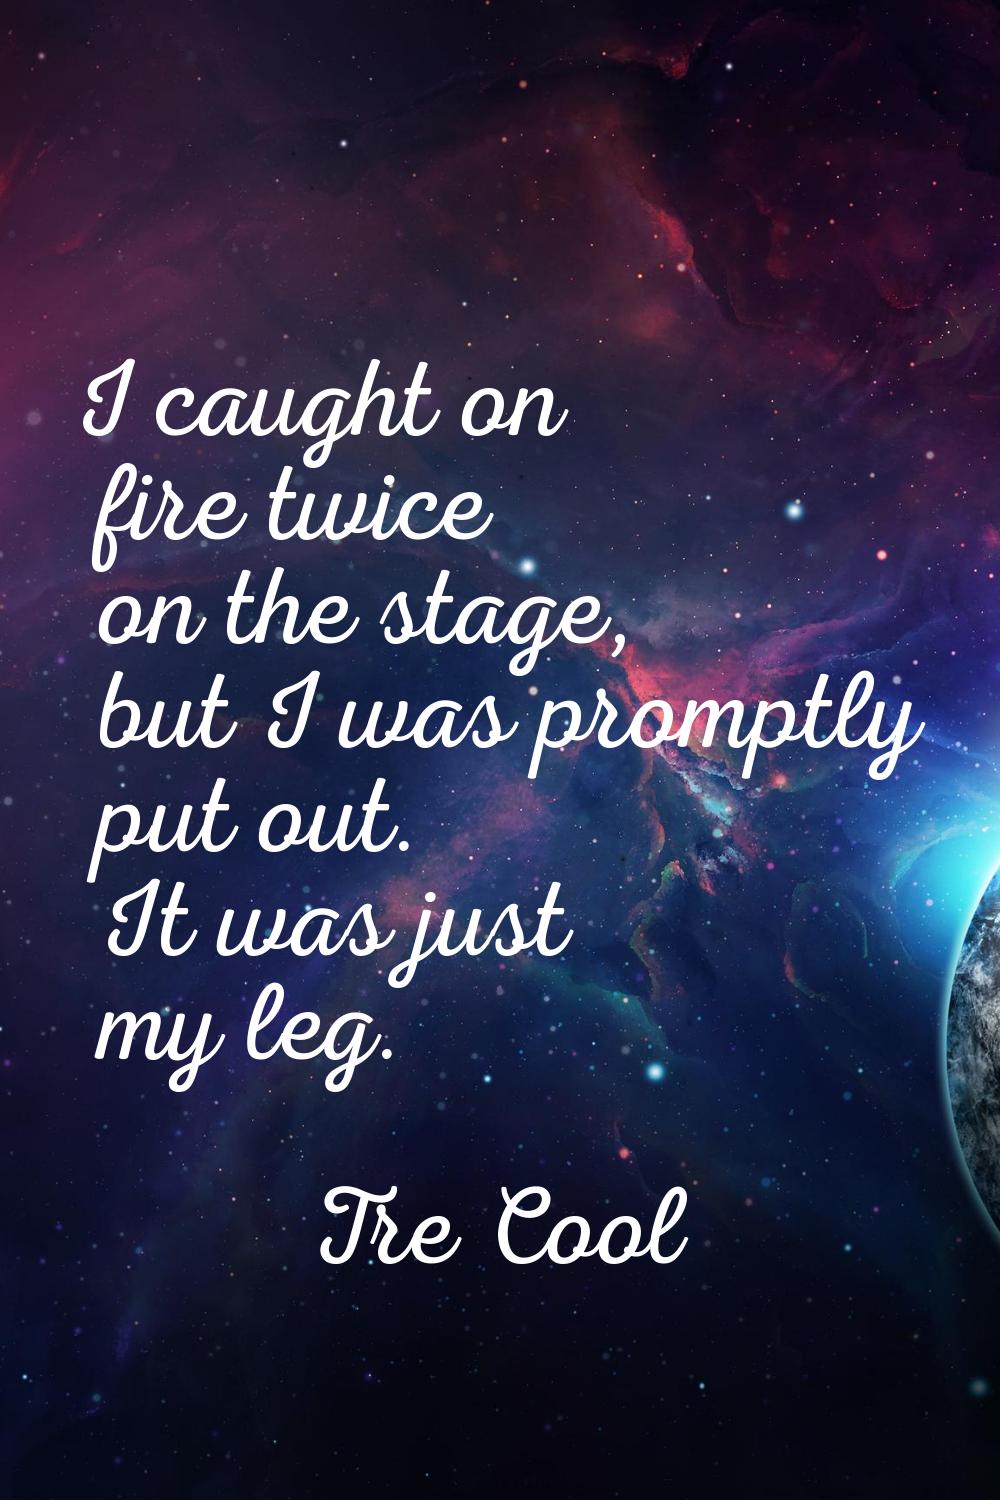 I caught on fire twice on the stage, but I was promptly put out. It was just my leg.